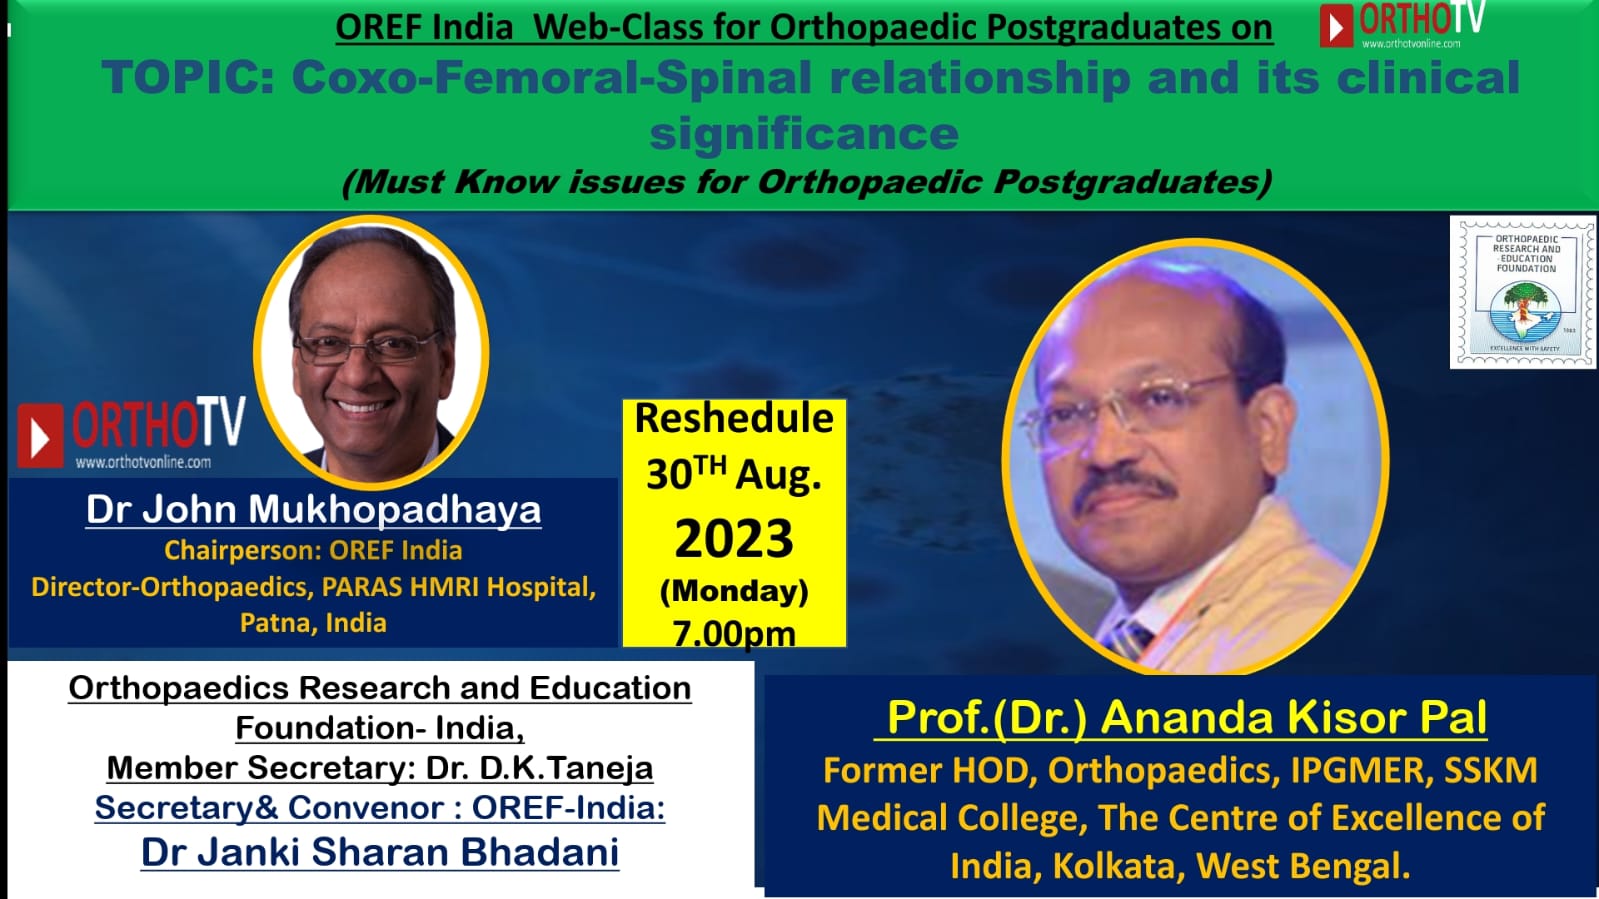 OREF Web-Class for Orthopaedic Postgraduates on OrthoTV - Coxo-Femoral-Spinal relationship and its clinical significance